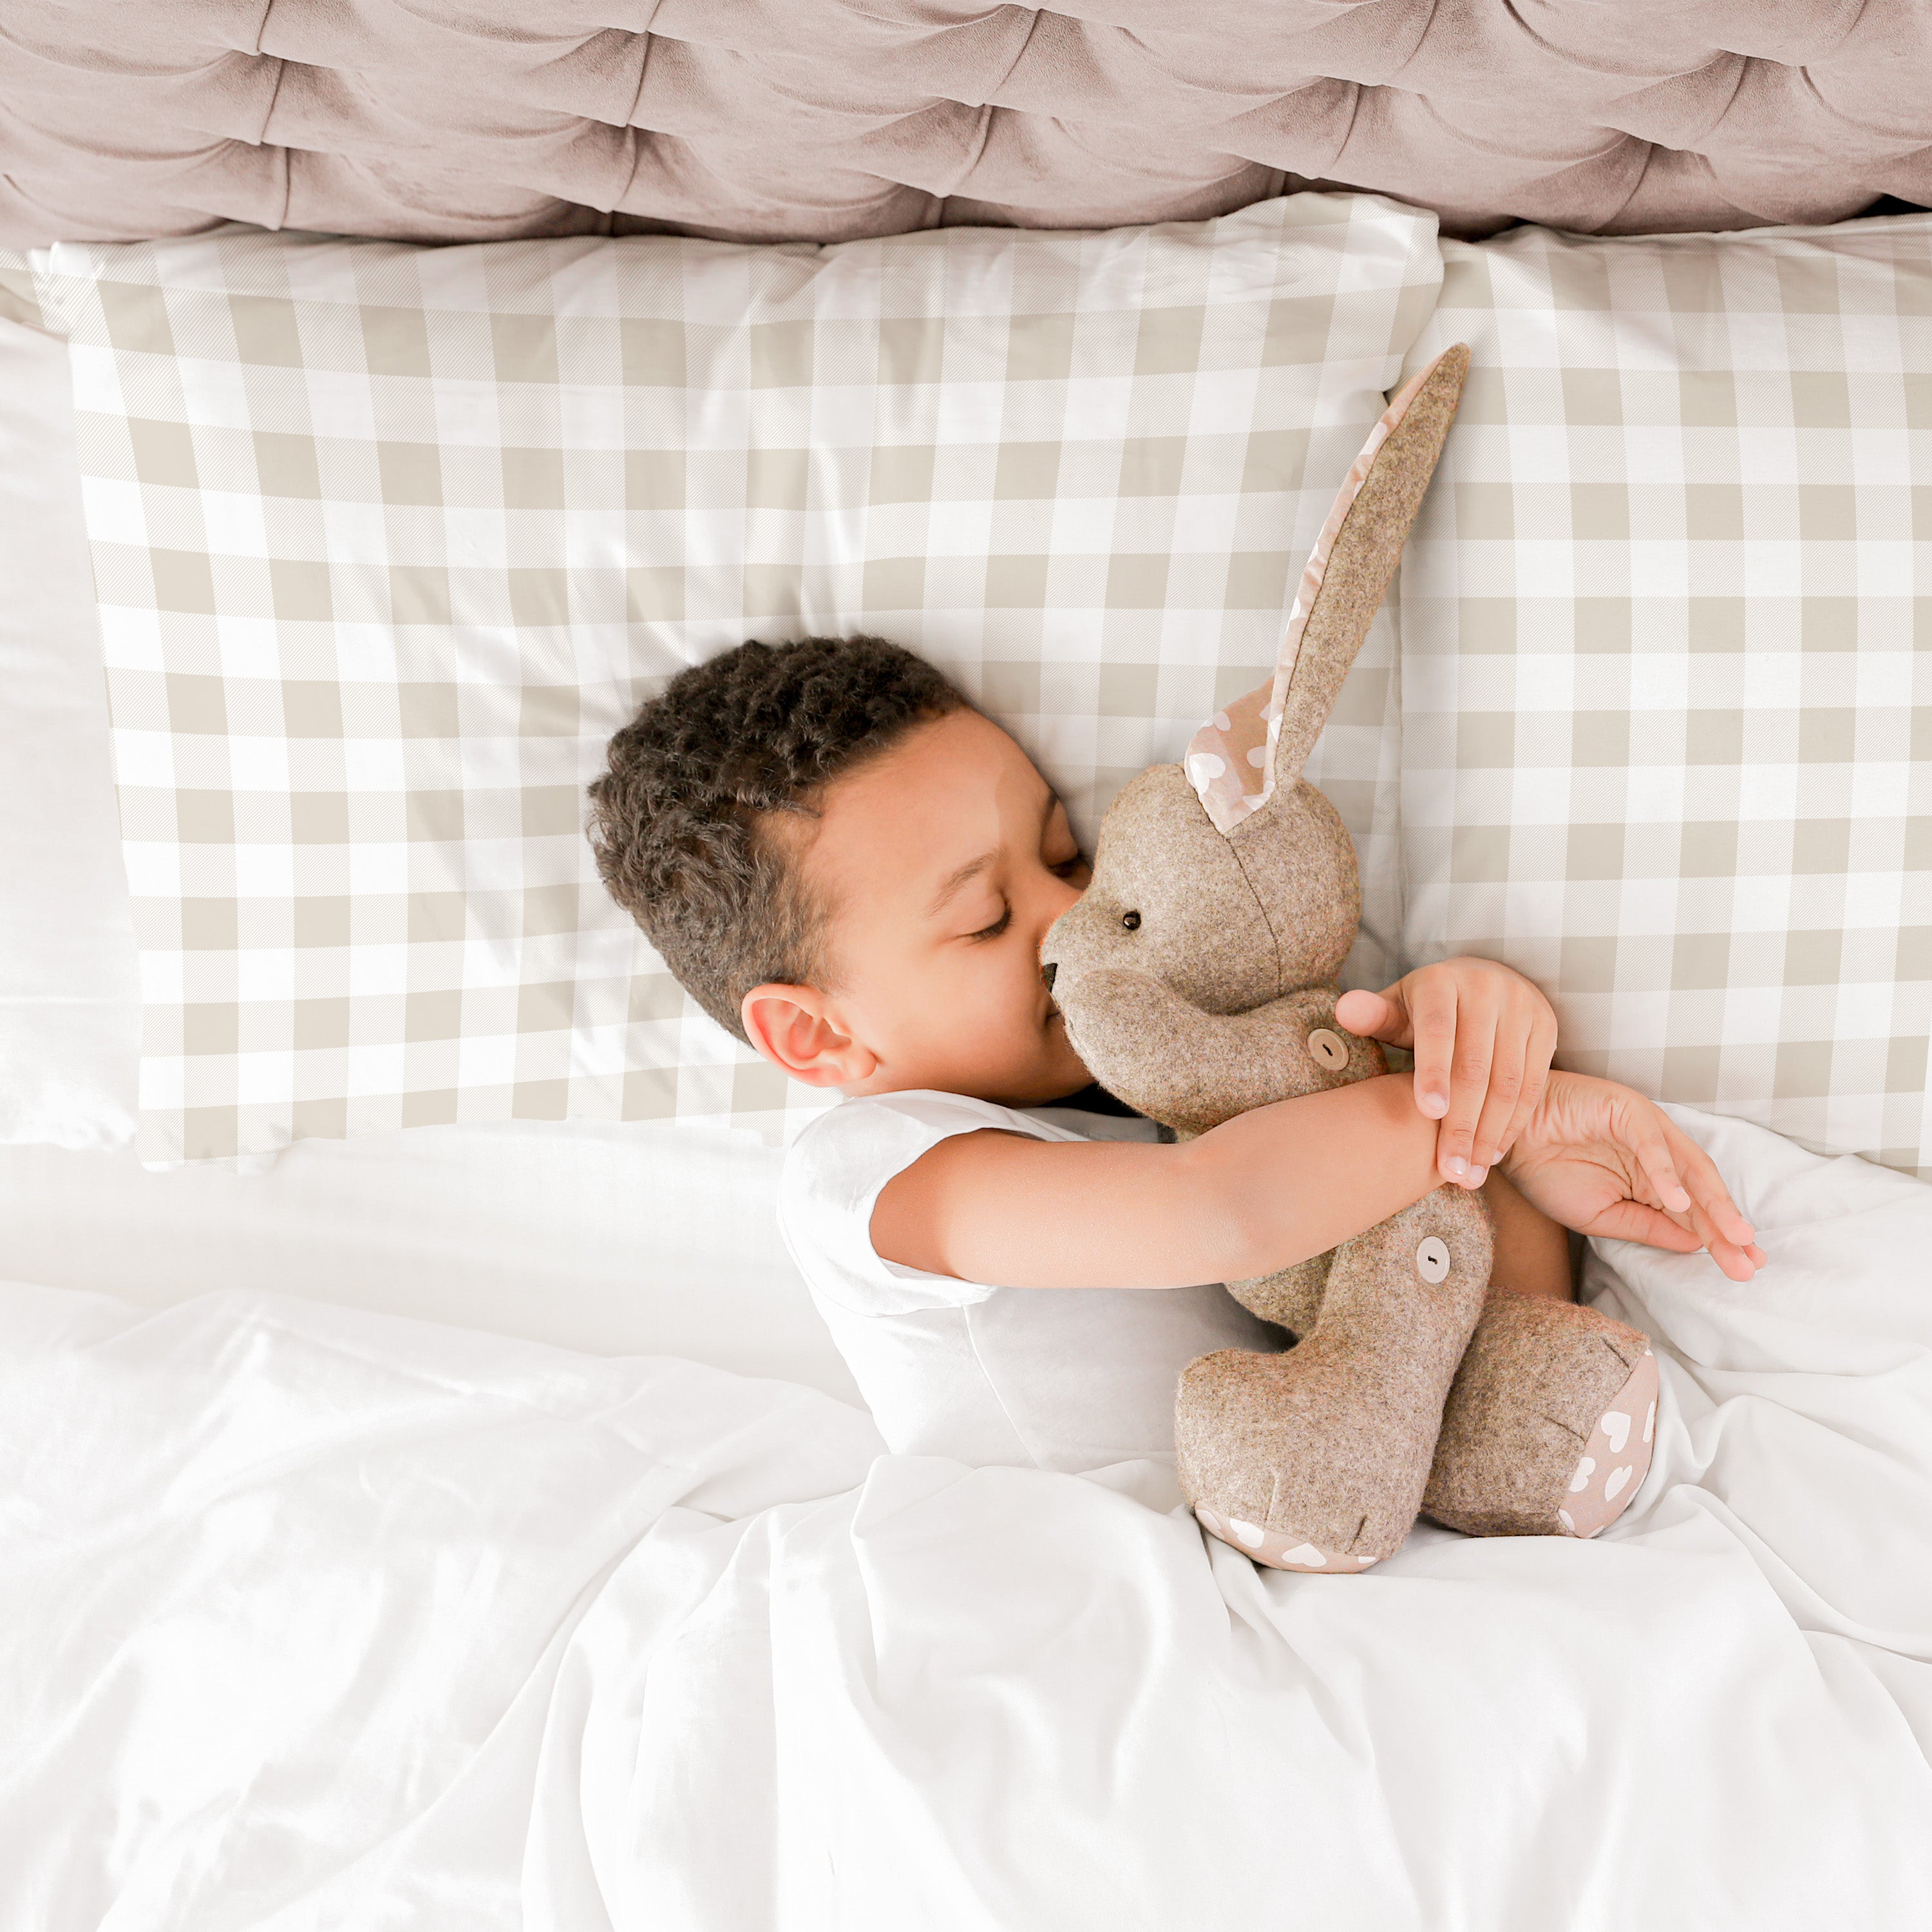 A young child lying on a bed, affectionately kissing a plush bunny toy. the bedding has a checkered pattern, creating a cozy atmosphere with the Makemake Organics Organic Cotton Toddler Pillowcase in Plaid.